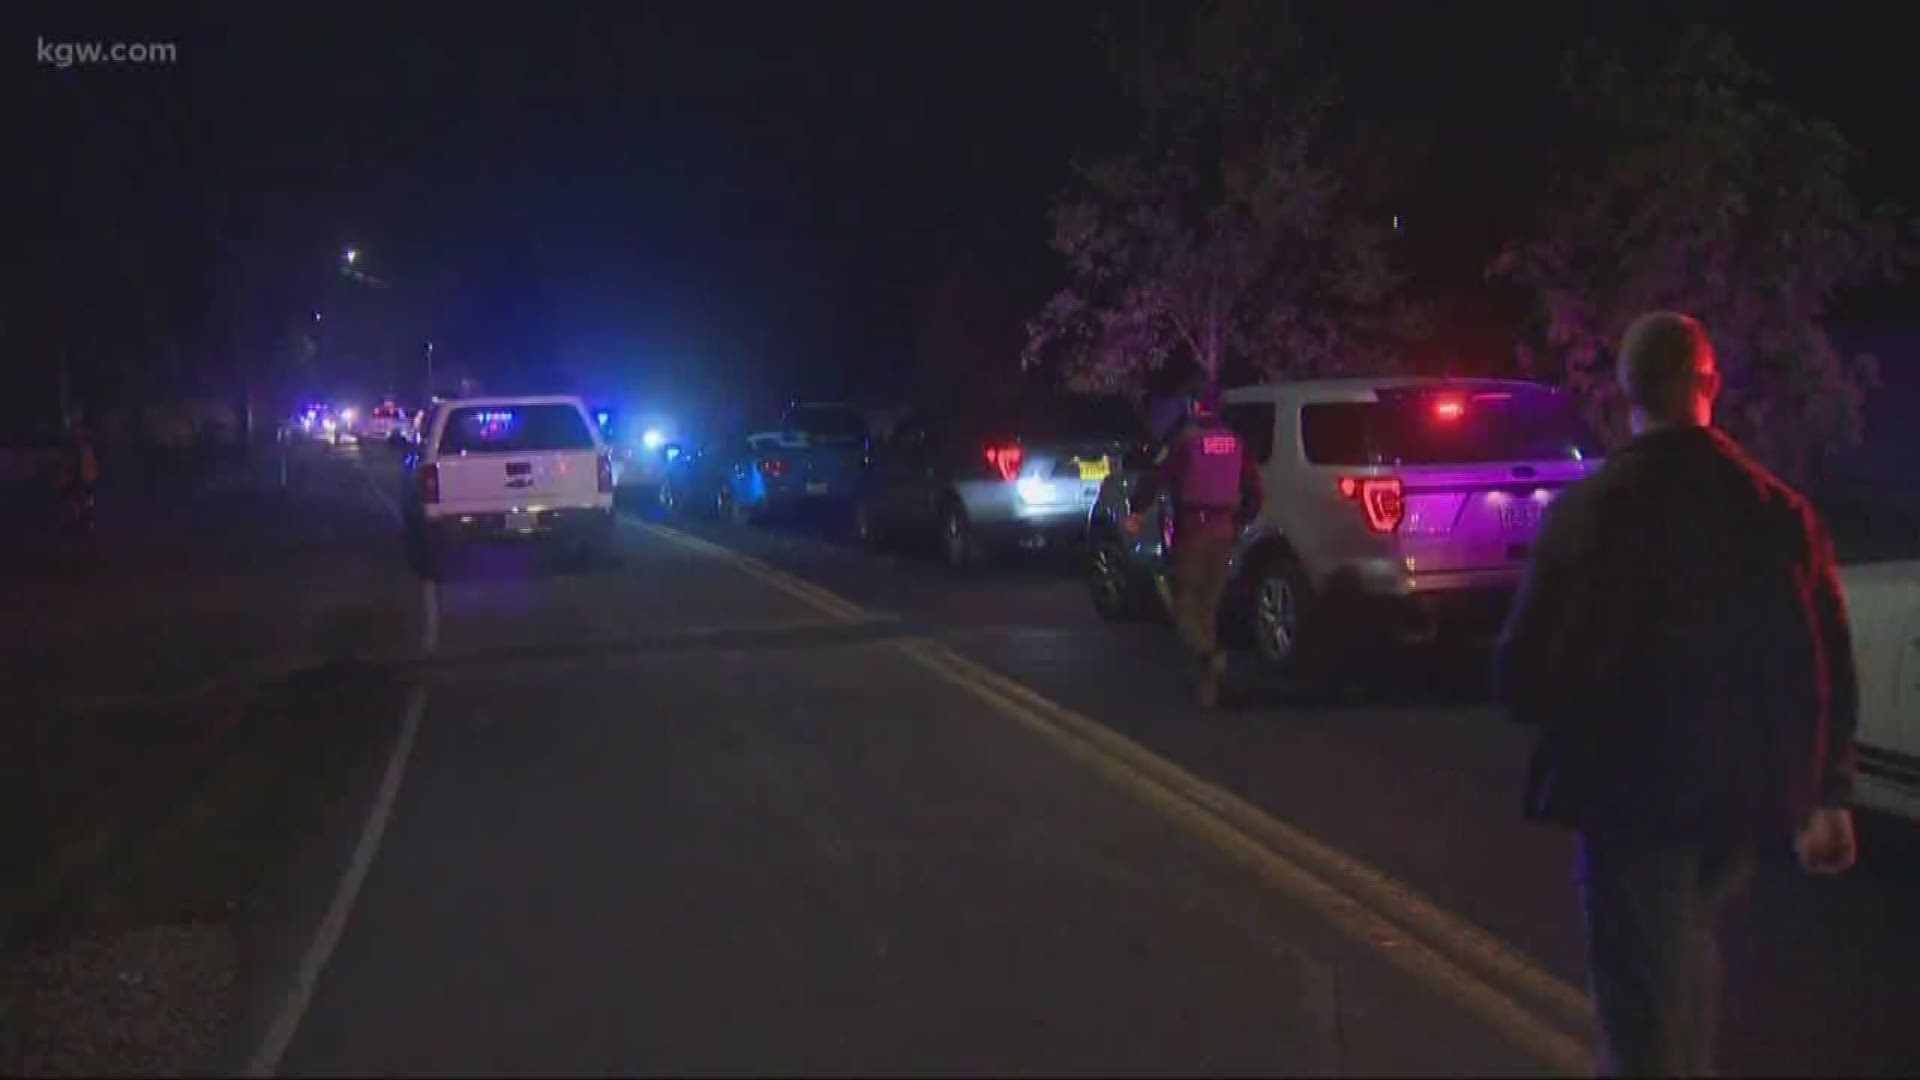 Authorities are investigating an officer-involved shooting that occurred in Southeast Portland on Friday night.